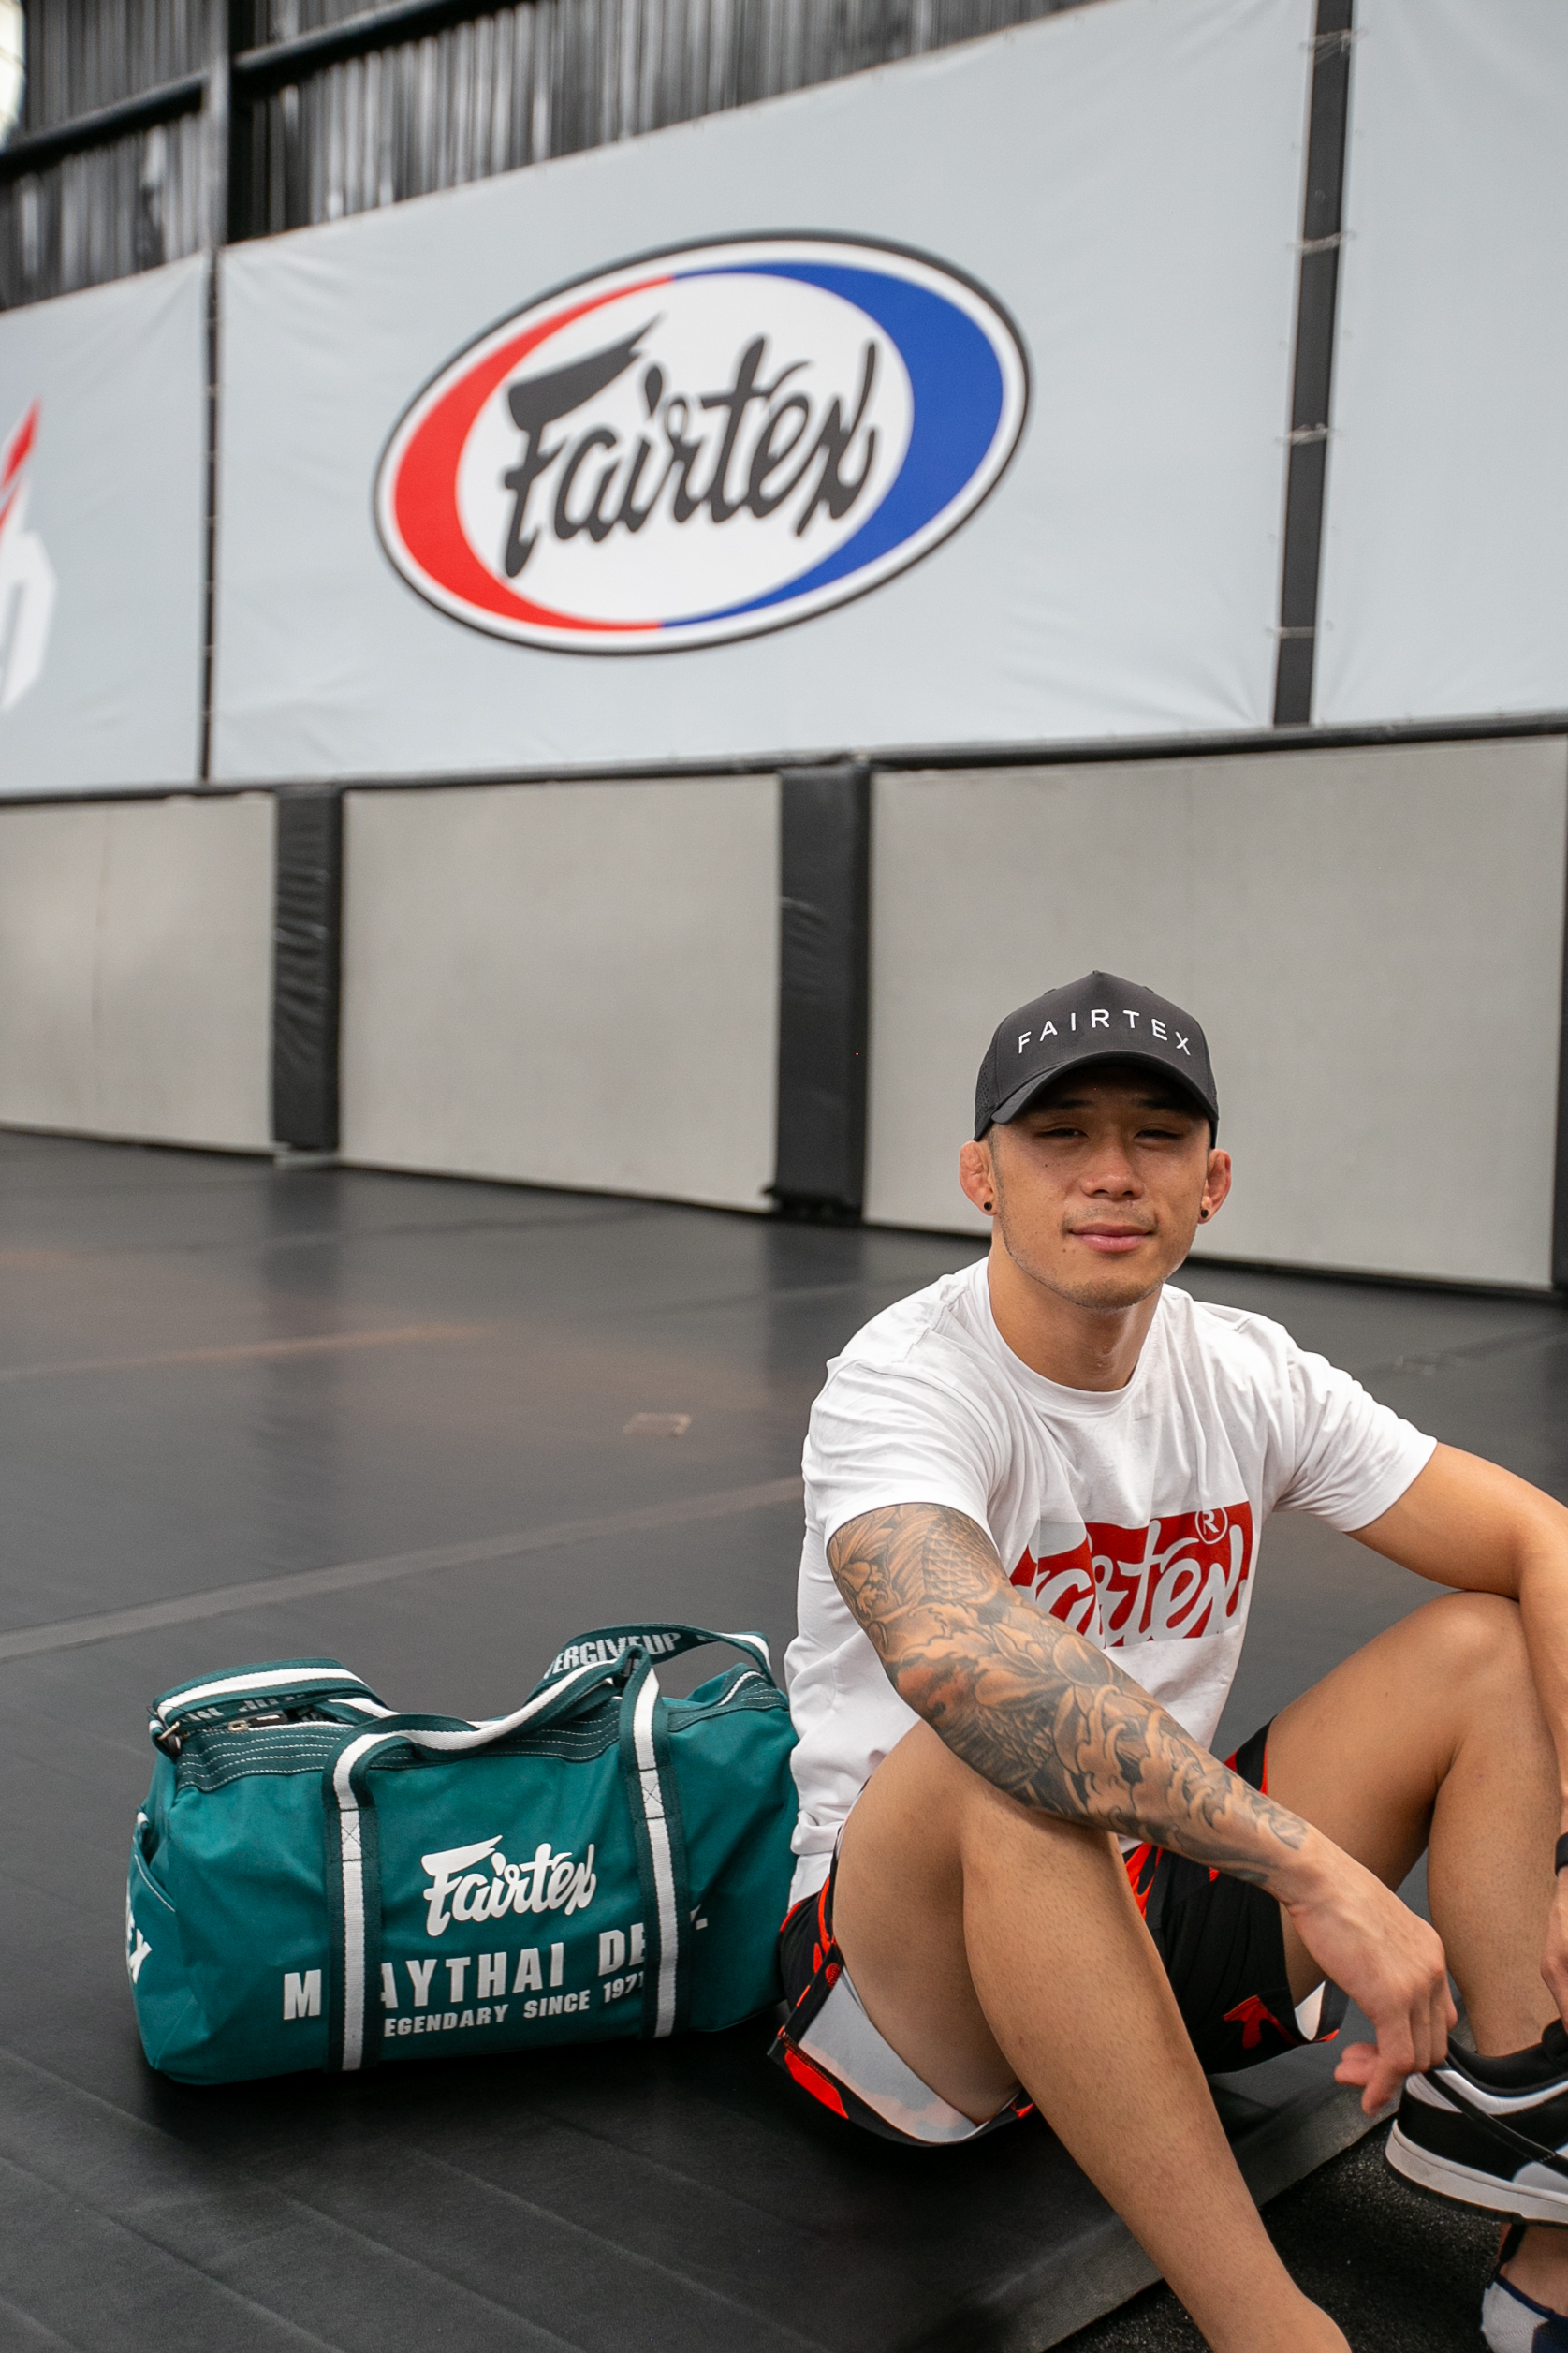 Fairtex on X: "The top seller in the gym bag section currently is #bag9 The  barrel-shape travel/gym bag is a lightweight bag Fit for anyone who needs a  compact bag with style.